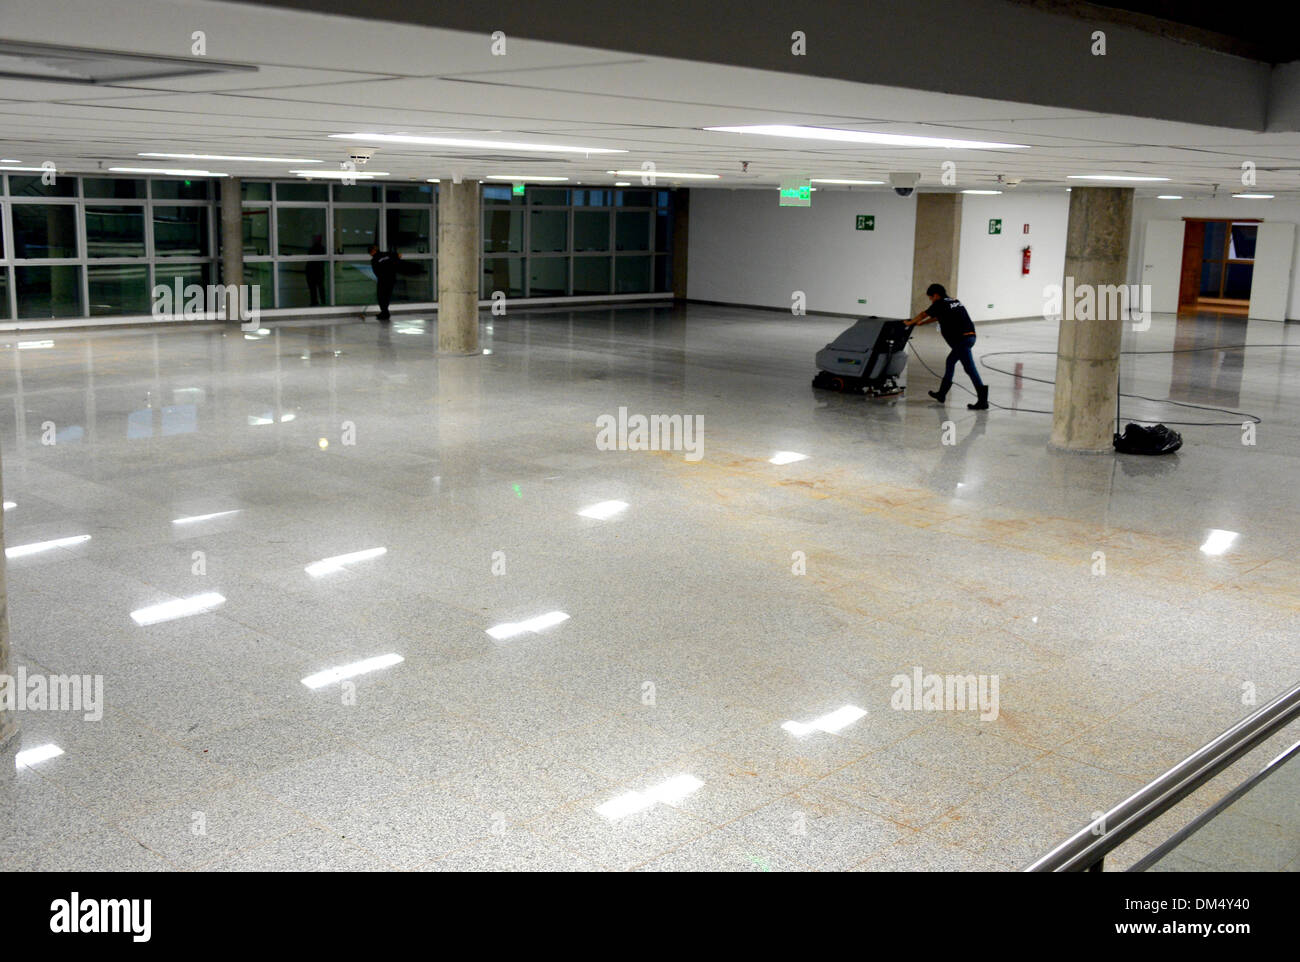 Cleaners are at work in the lobby area of the 'Stadion Nacional Mane Garrincha' stadium in Brasilia, Brazil, 9 December 2013. The Stadion Nacional Mane Garrincha is one of the venues which will host the matches for the 2014 Soccer World Cup in Brazil. Photo: Marcus Brandt/dpa Stock Photo